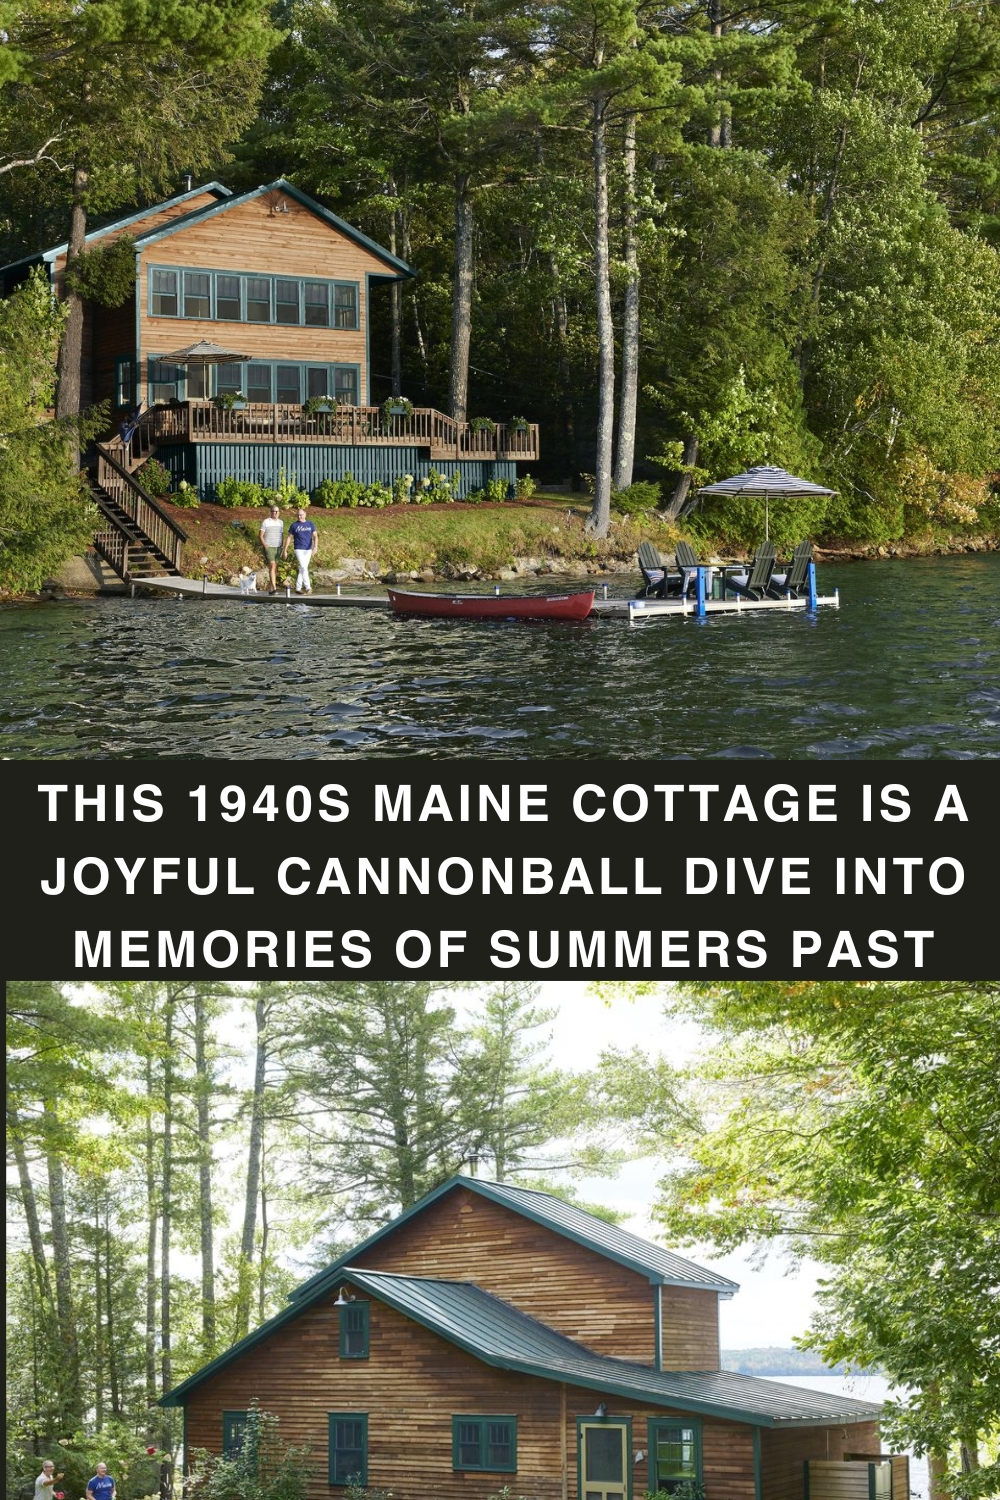 This 1940s Maine Cottage is a Joyful Cannonball Dive into Memories of Summers Past
